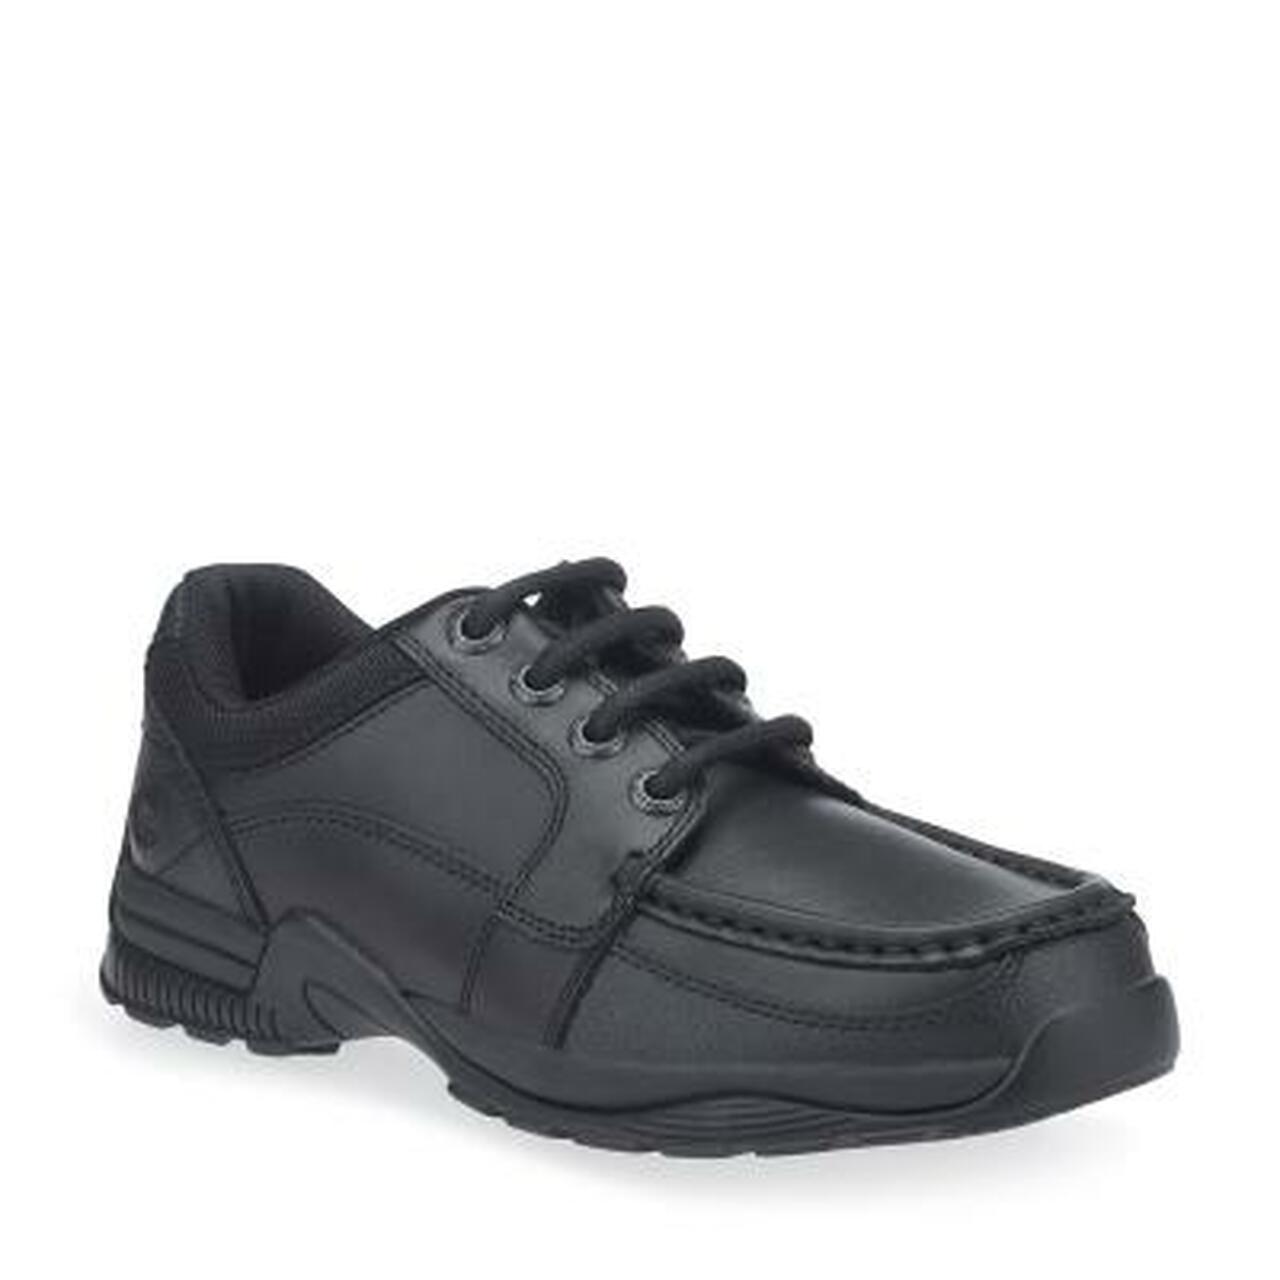 A boys school shoe by Start Rite,style Dylan, in black leather with lace up fastening. Angled view.